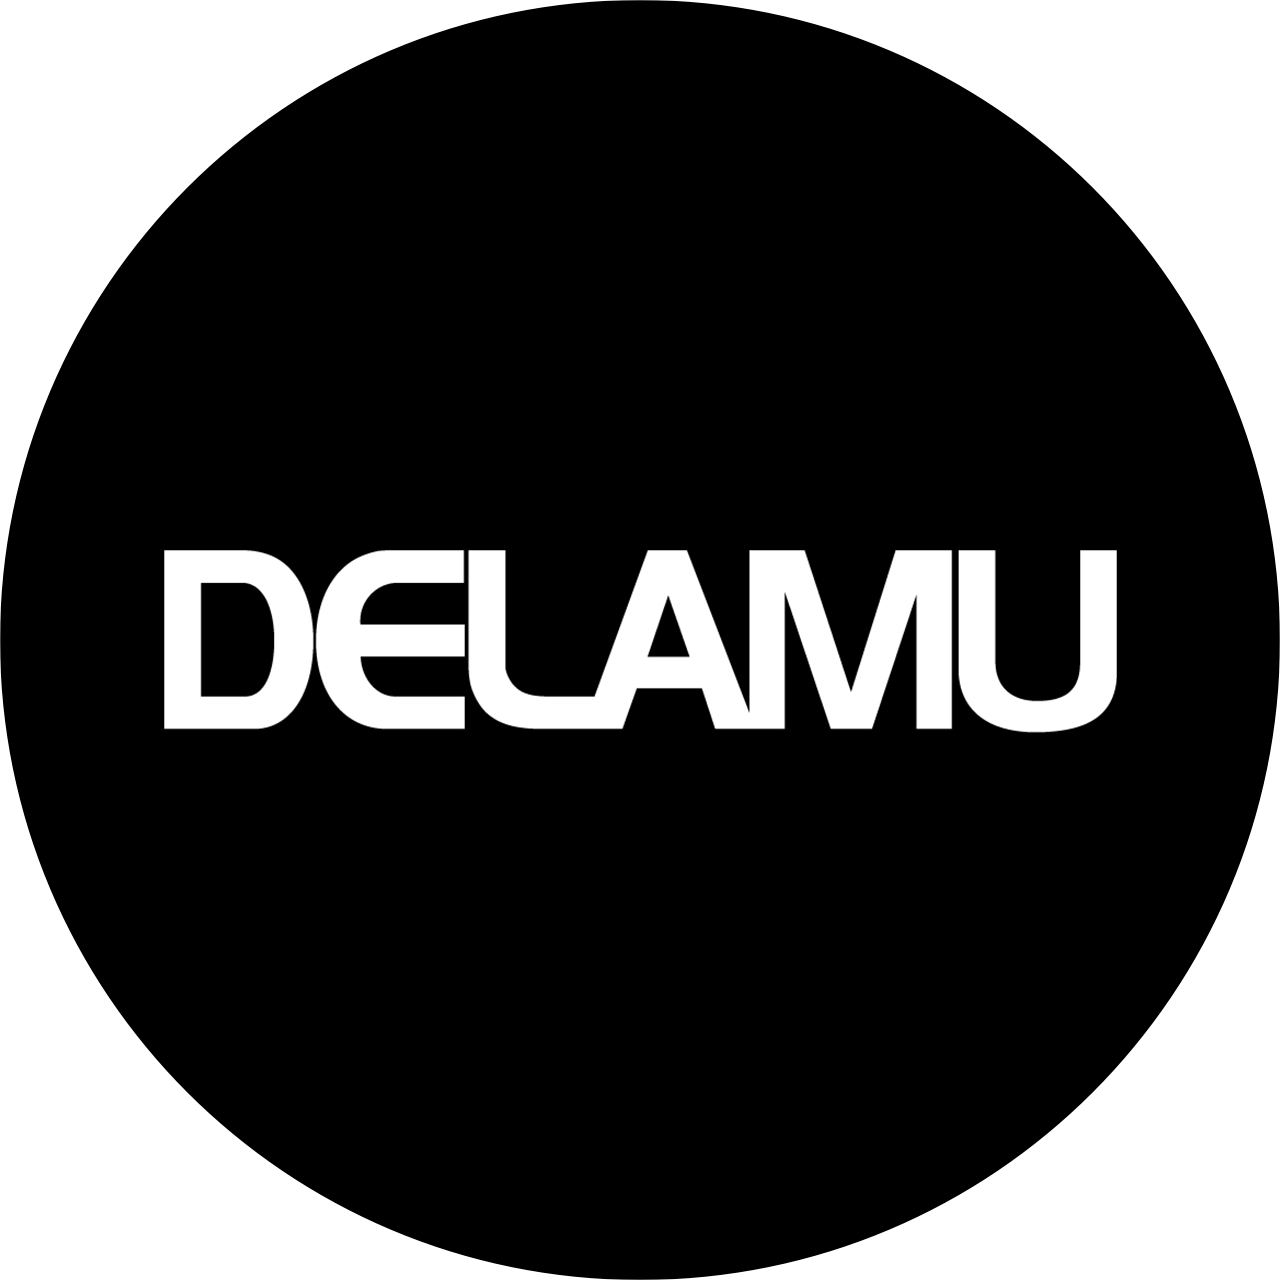 Delamu Cord Cover Raceway Kit, 157 Cable Management Channel, Paintable Cord  Concealer System Covers Cable, Cord Wires, Hiding Wall Mount TV Powers Cords  In Home Office, 10X L15.7 In X W0.95 In